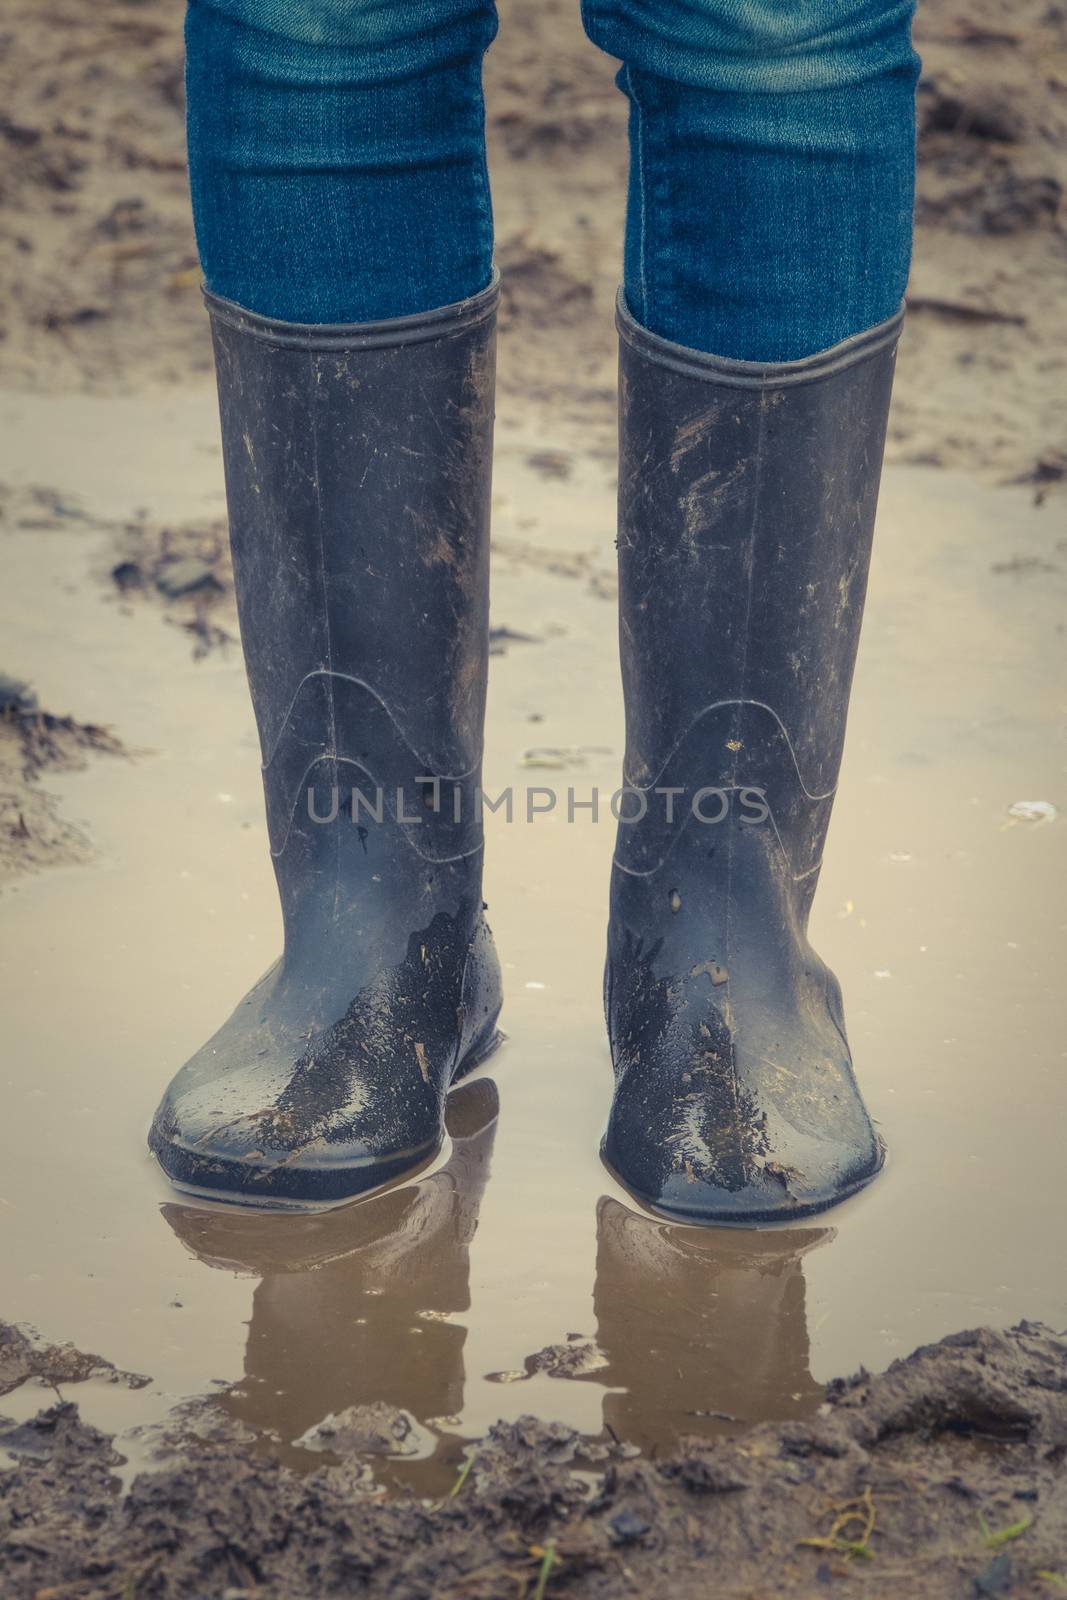 A Child's Legs In Black Rubber Boots Standing In A Muddy Autumn Puddle